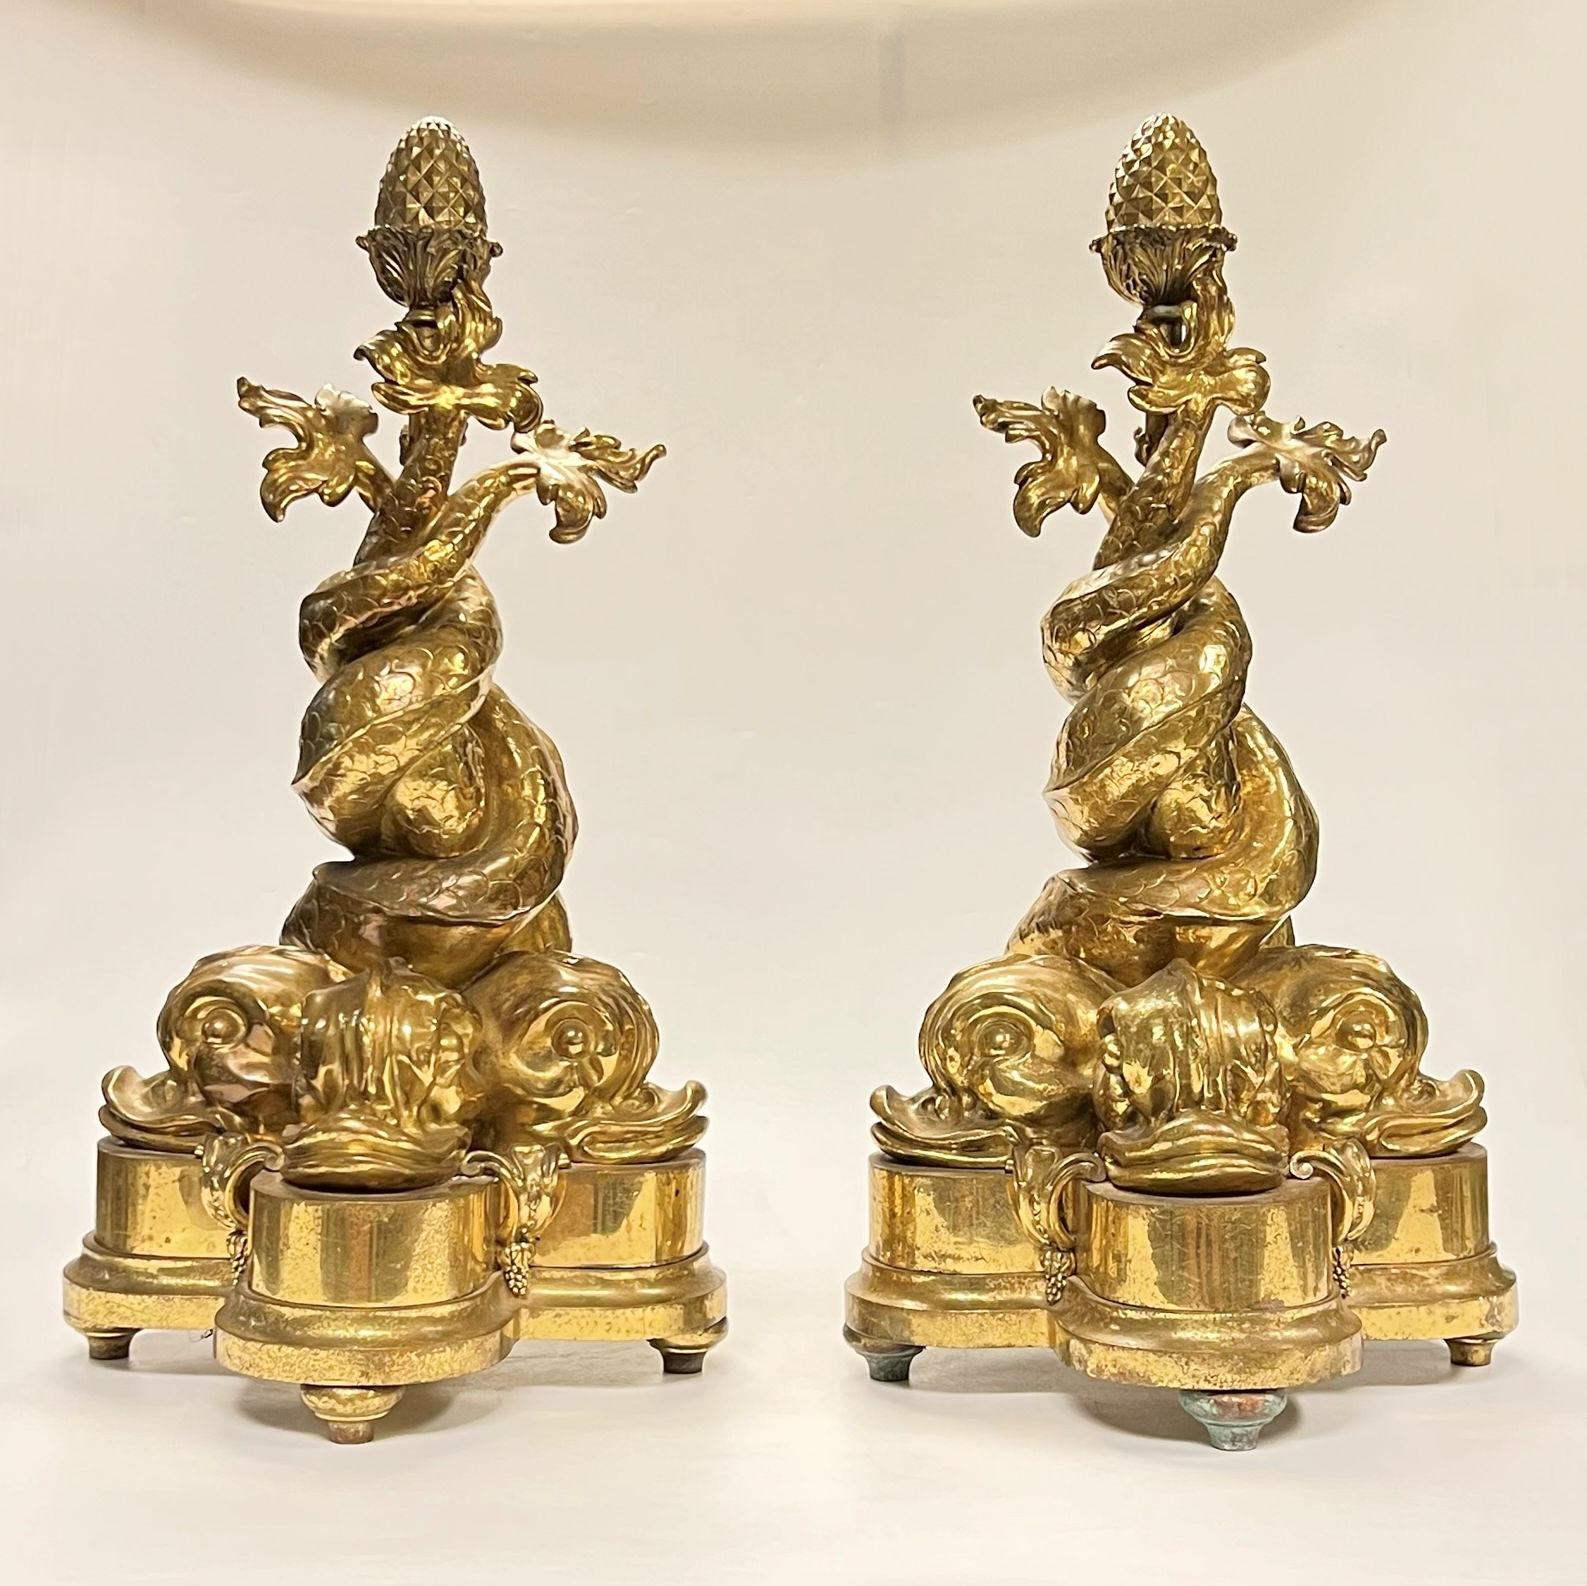 Pair Neoclassical Style Dolphin Form Gilt Bronze Chenets, distinguished by their monumental scale and casting.